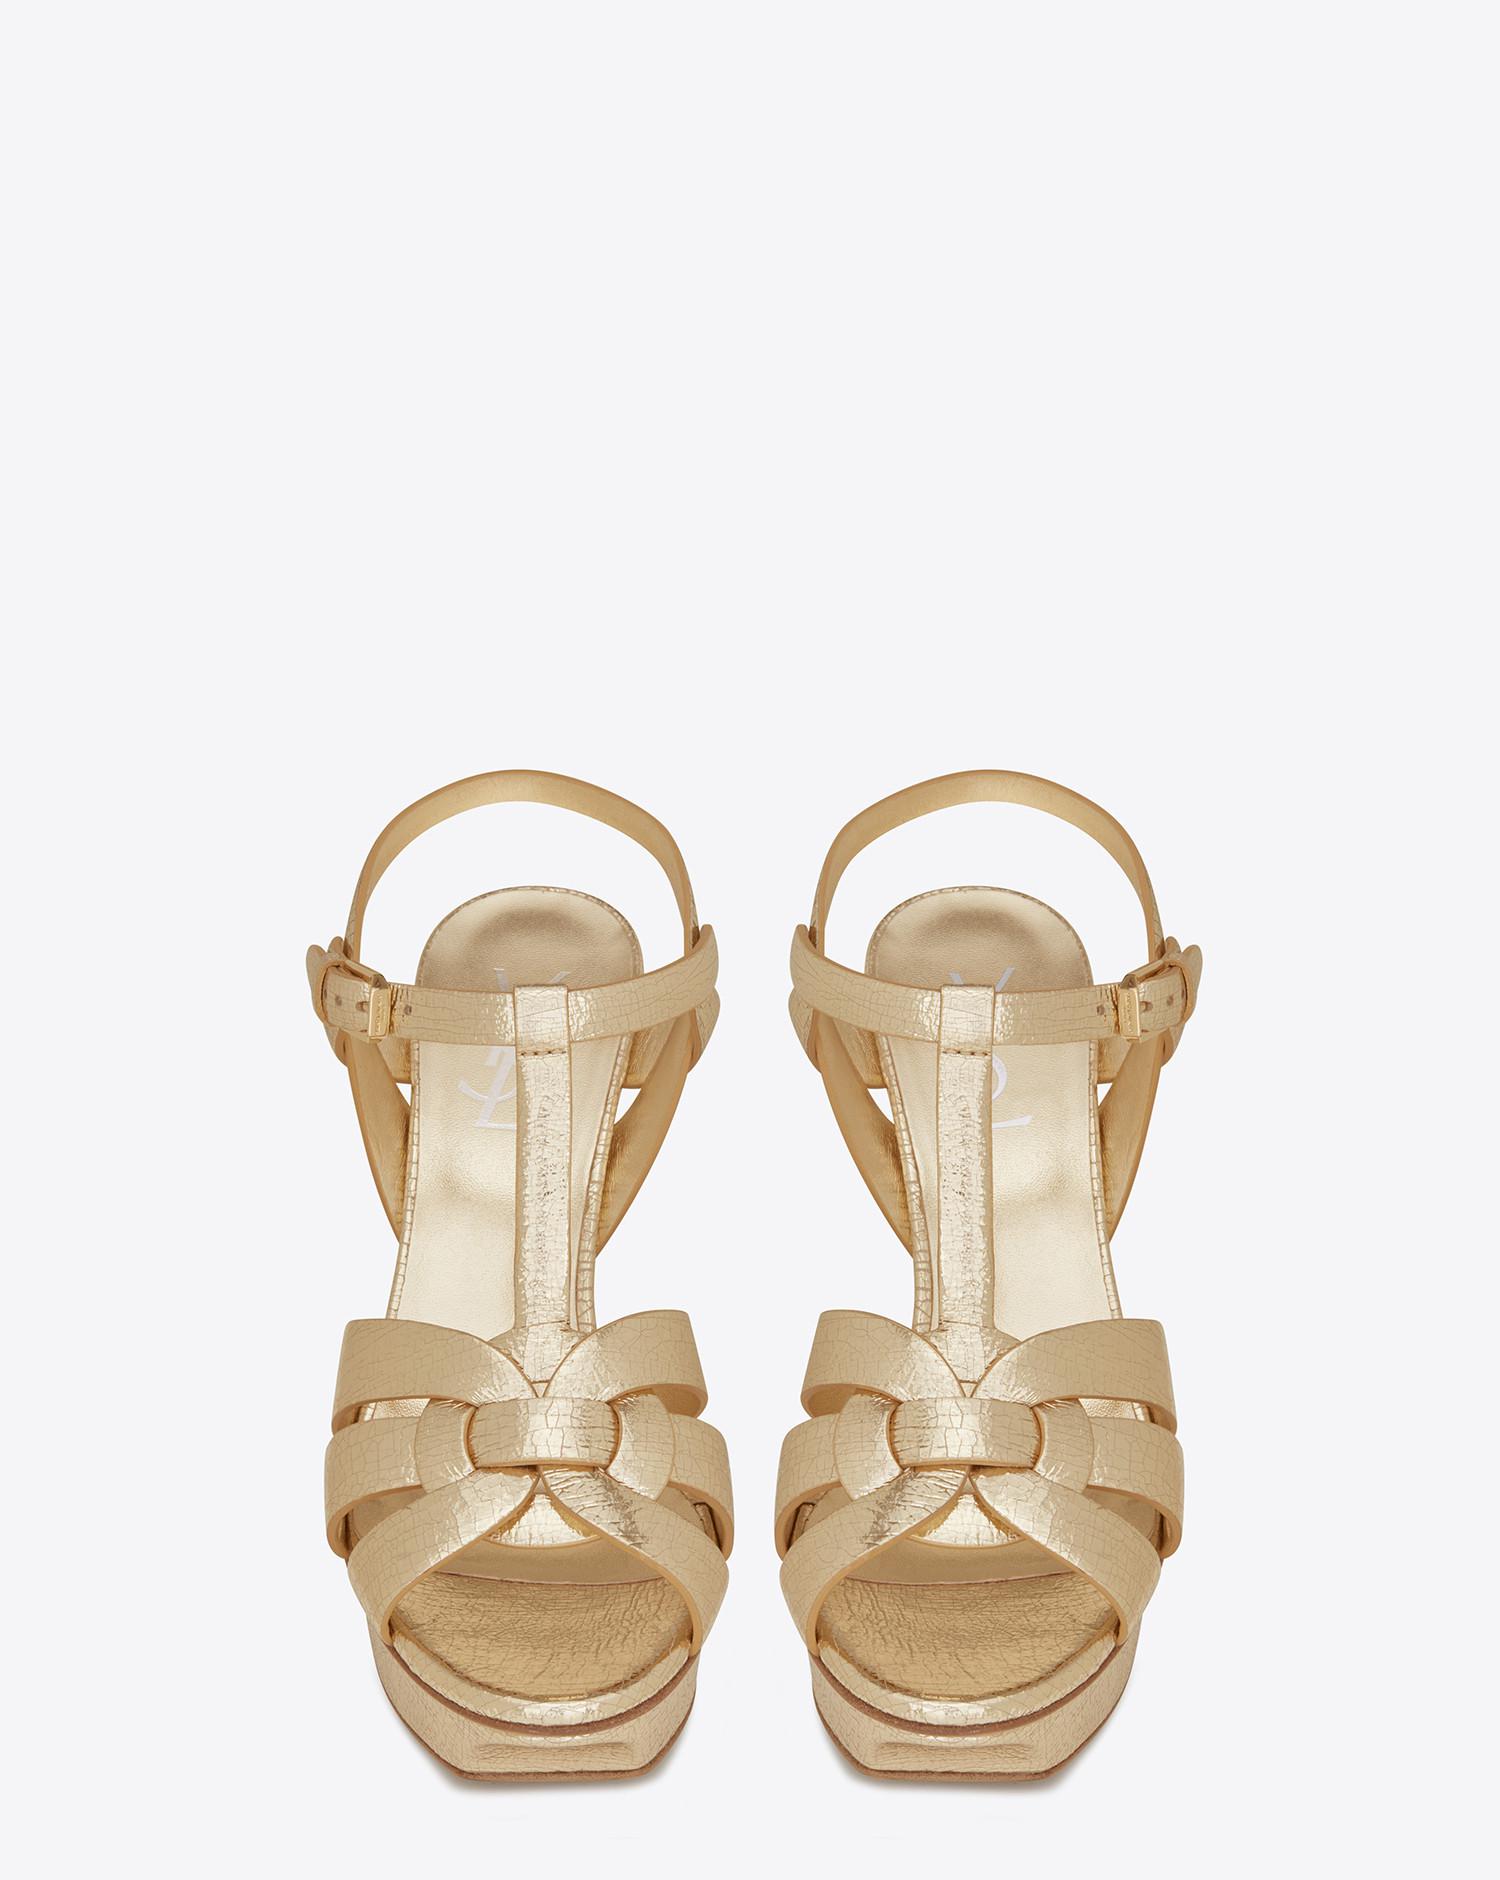 Saint Laurent Tribute 75 Sandal In Pale Gold Cracked Metallic Leather | Lyst